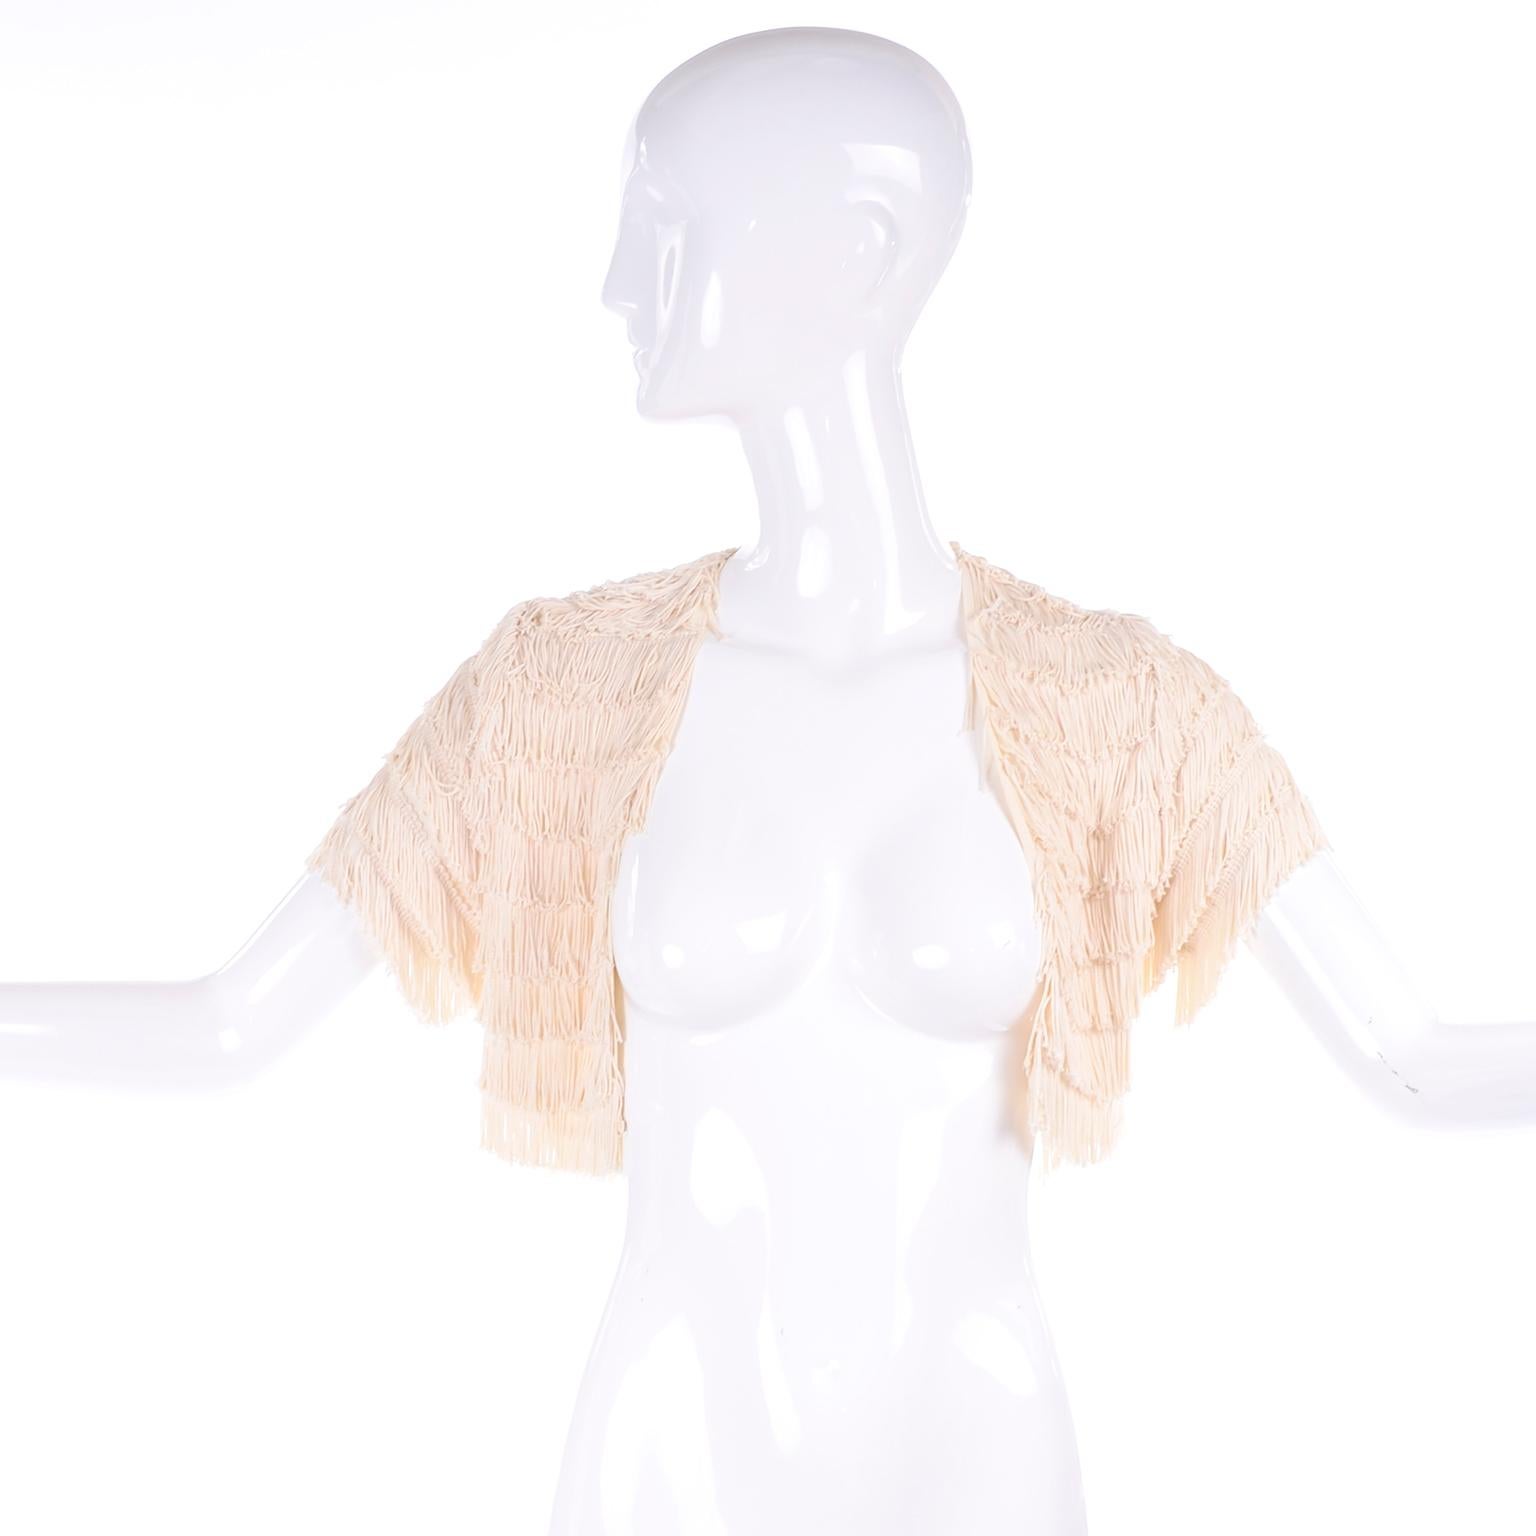 This is a fun and versatile cropped bolero from the late 1920's or early 1920's. This fabulous little top has layers of cream fringe and short sleeves and it is much prettier than the photos represent. It is open in front with no closures and would